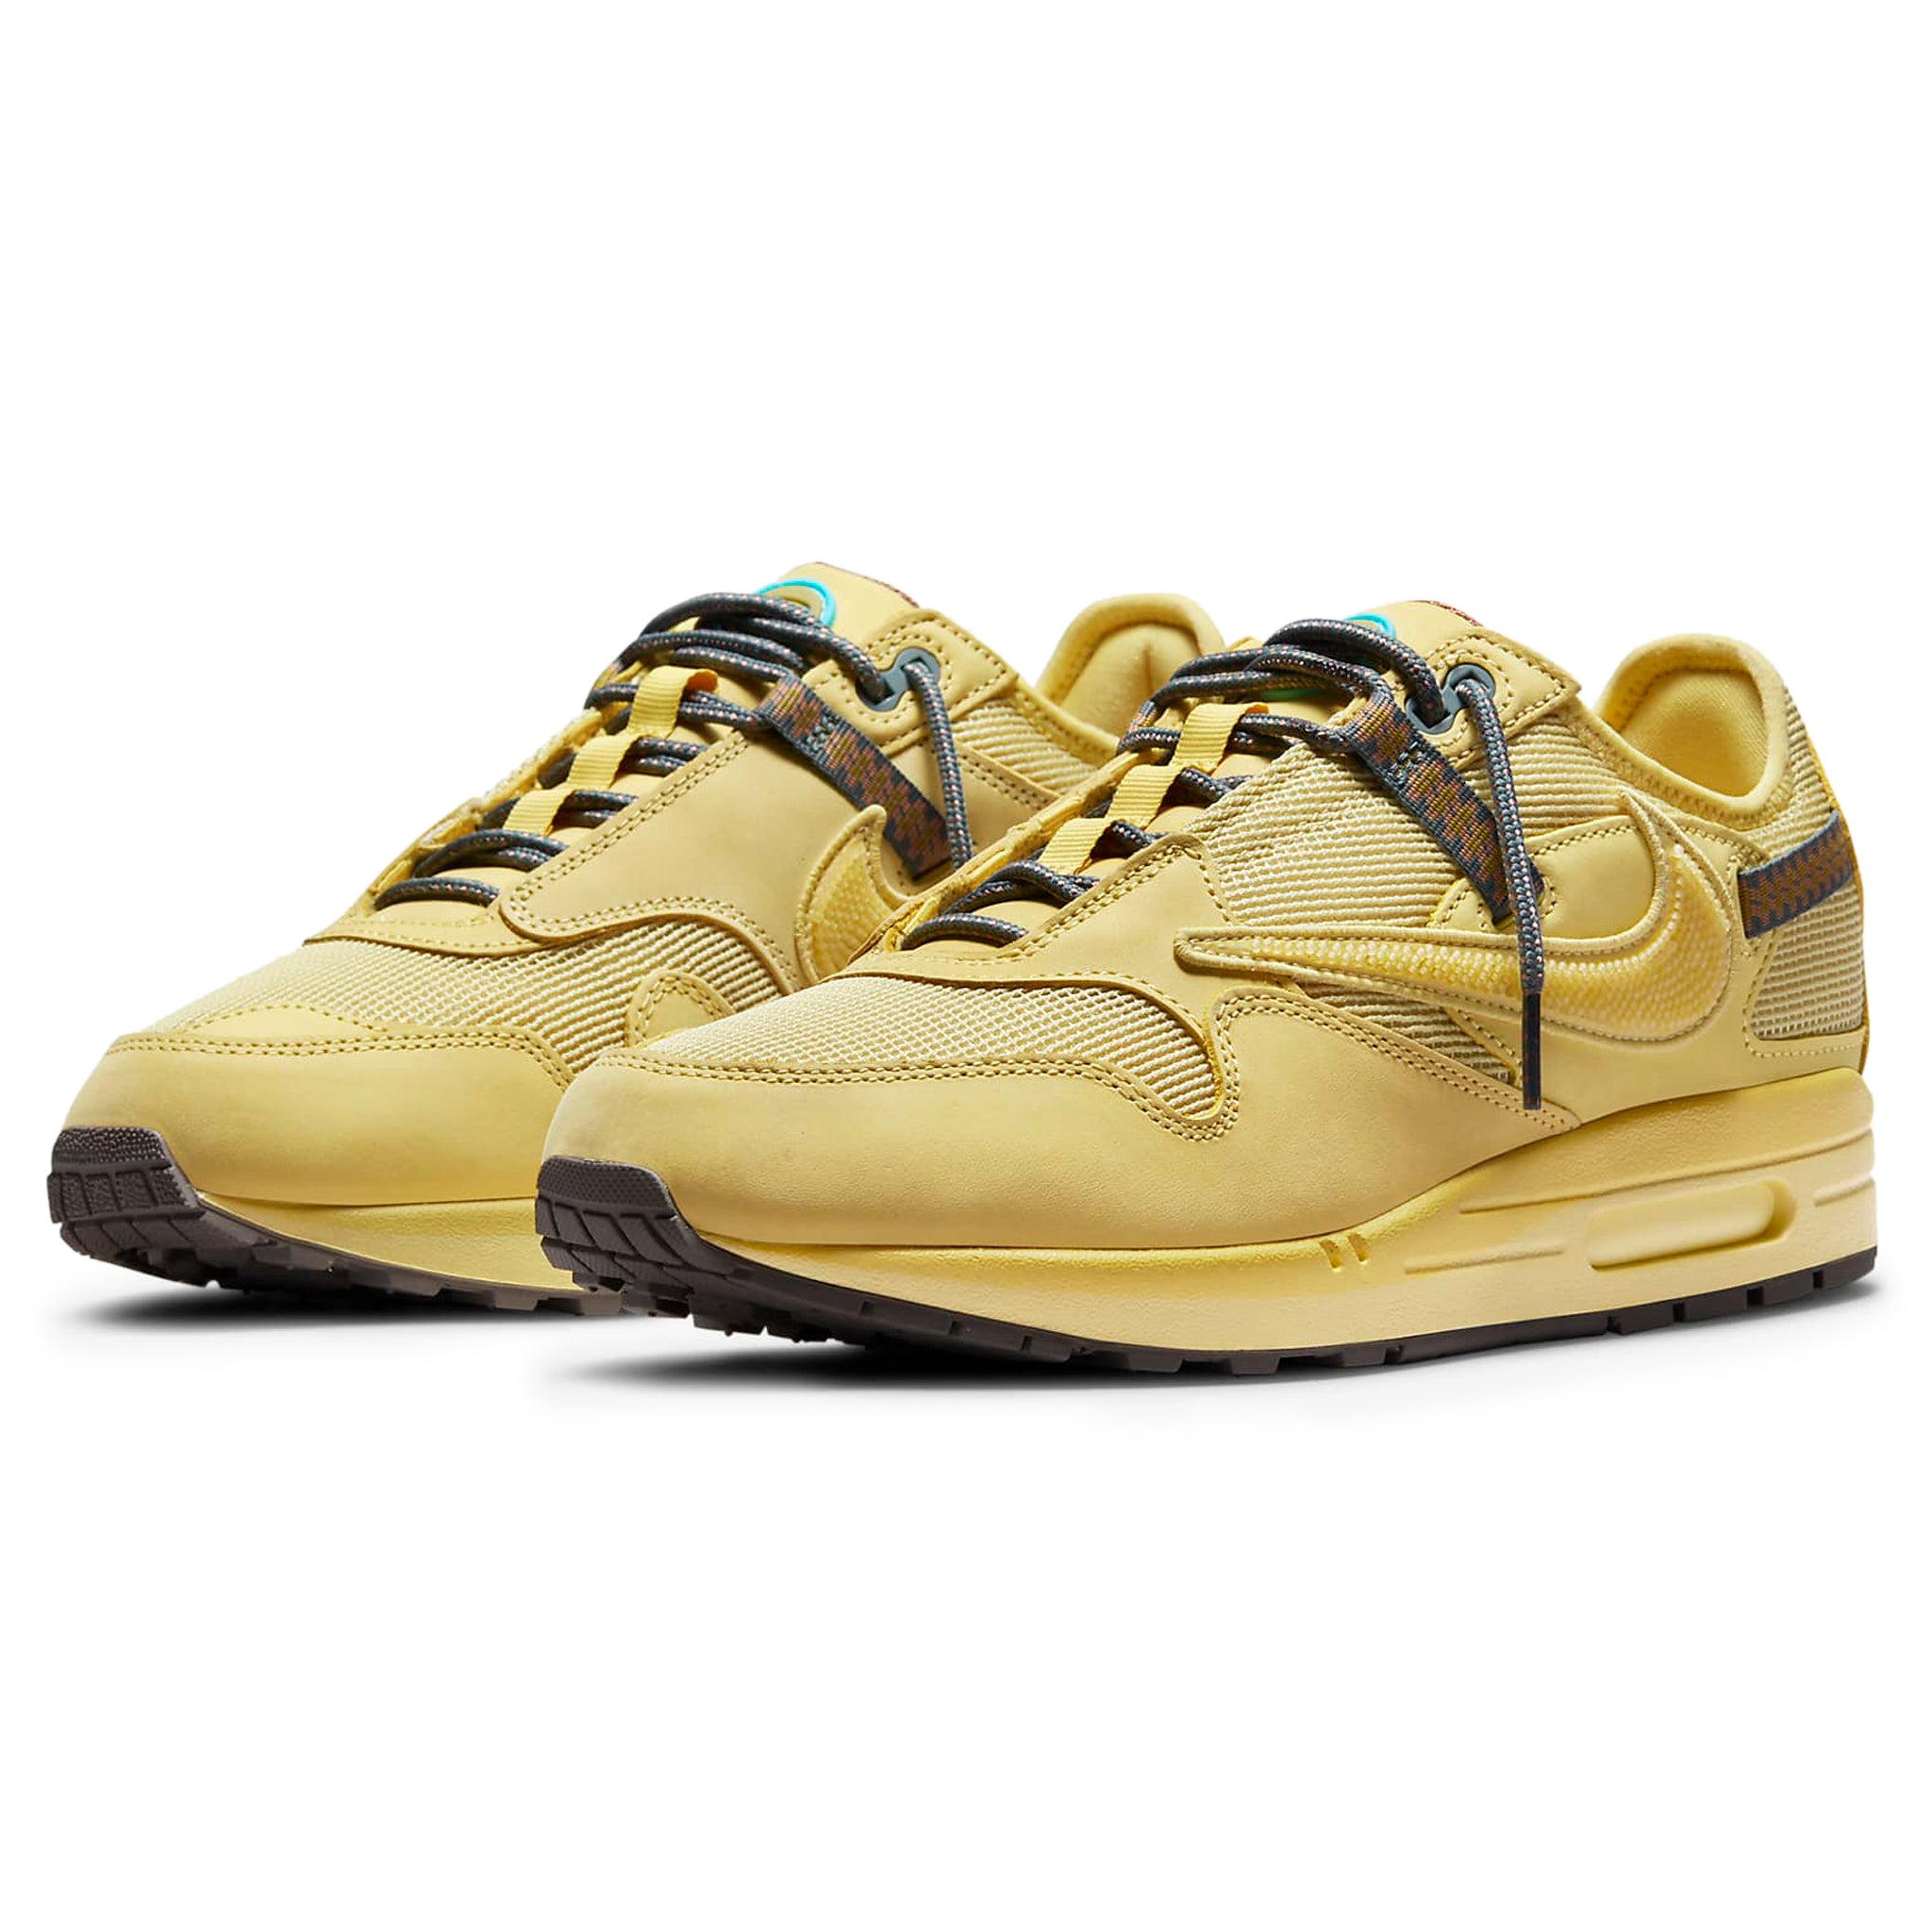 Front side view of Travis Scott x Nike Air Max 1 Saturn Gold DO9392-700